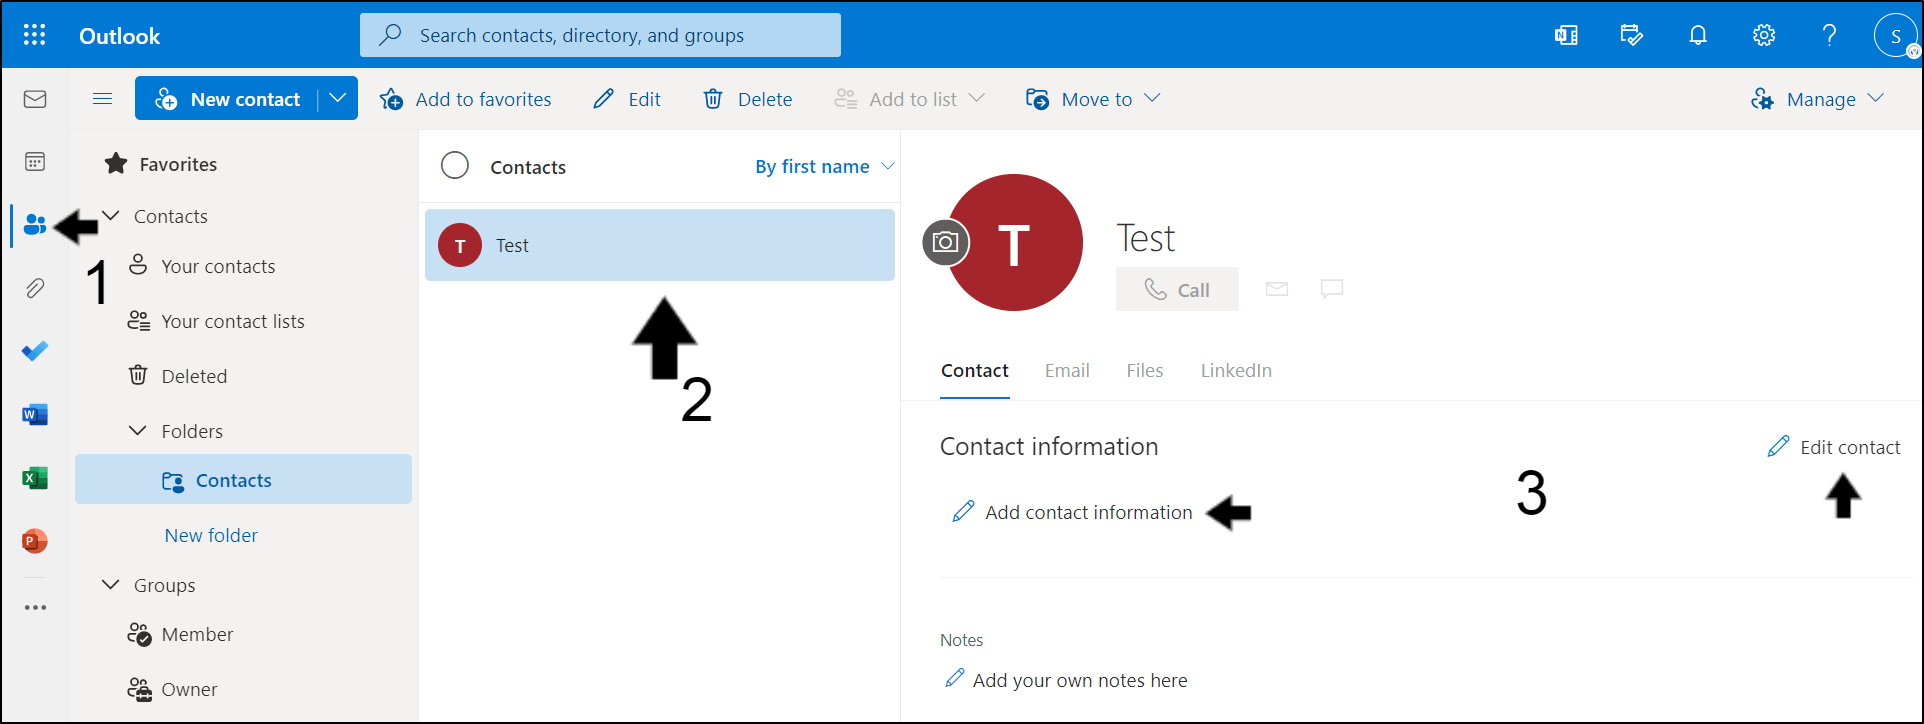 update contacts' information on Outlook to fix Microsoft Teams contacts and calendar not showing, updating, or syncing with Outlook